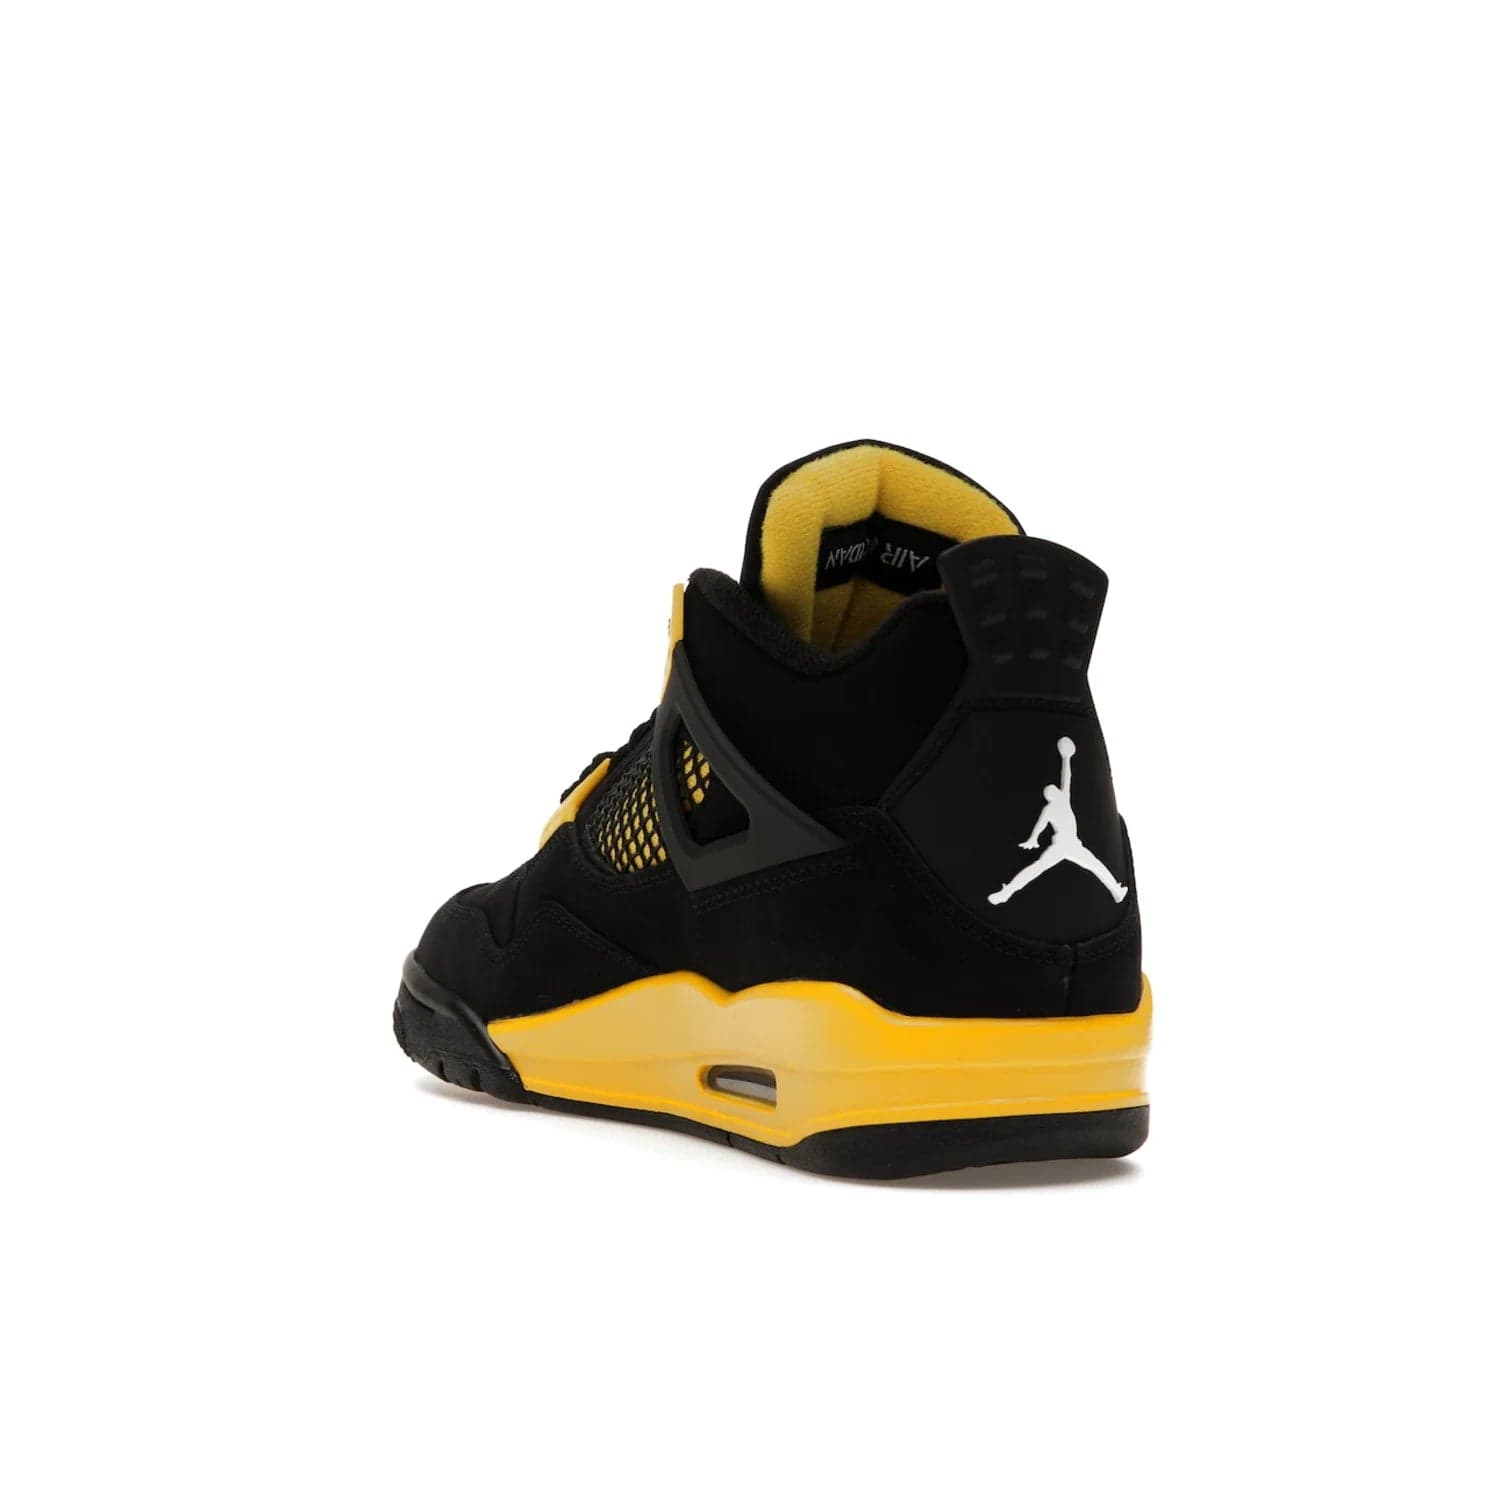 Jordan 4 Retro Thunder (2023) - Image 25 - Only at www.BallersClubKickz.com - Iconic Air Jordan 4 Retro Thunder (2023) returns with black nubuck upper and Tour Yellow details. Featuring Jumpman logo on heel tab, tongue and insoles. Dropping May 13th, 2023.